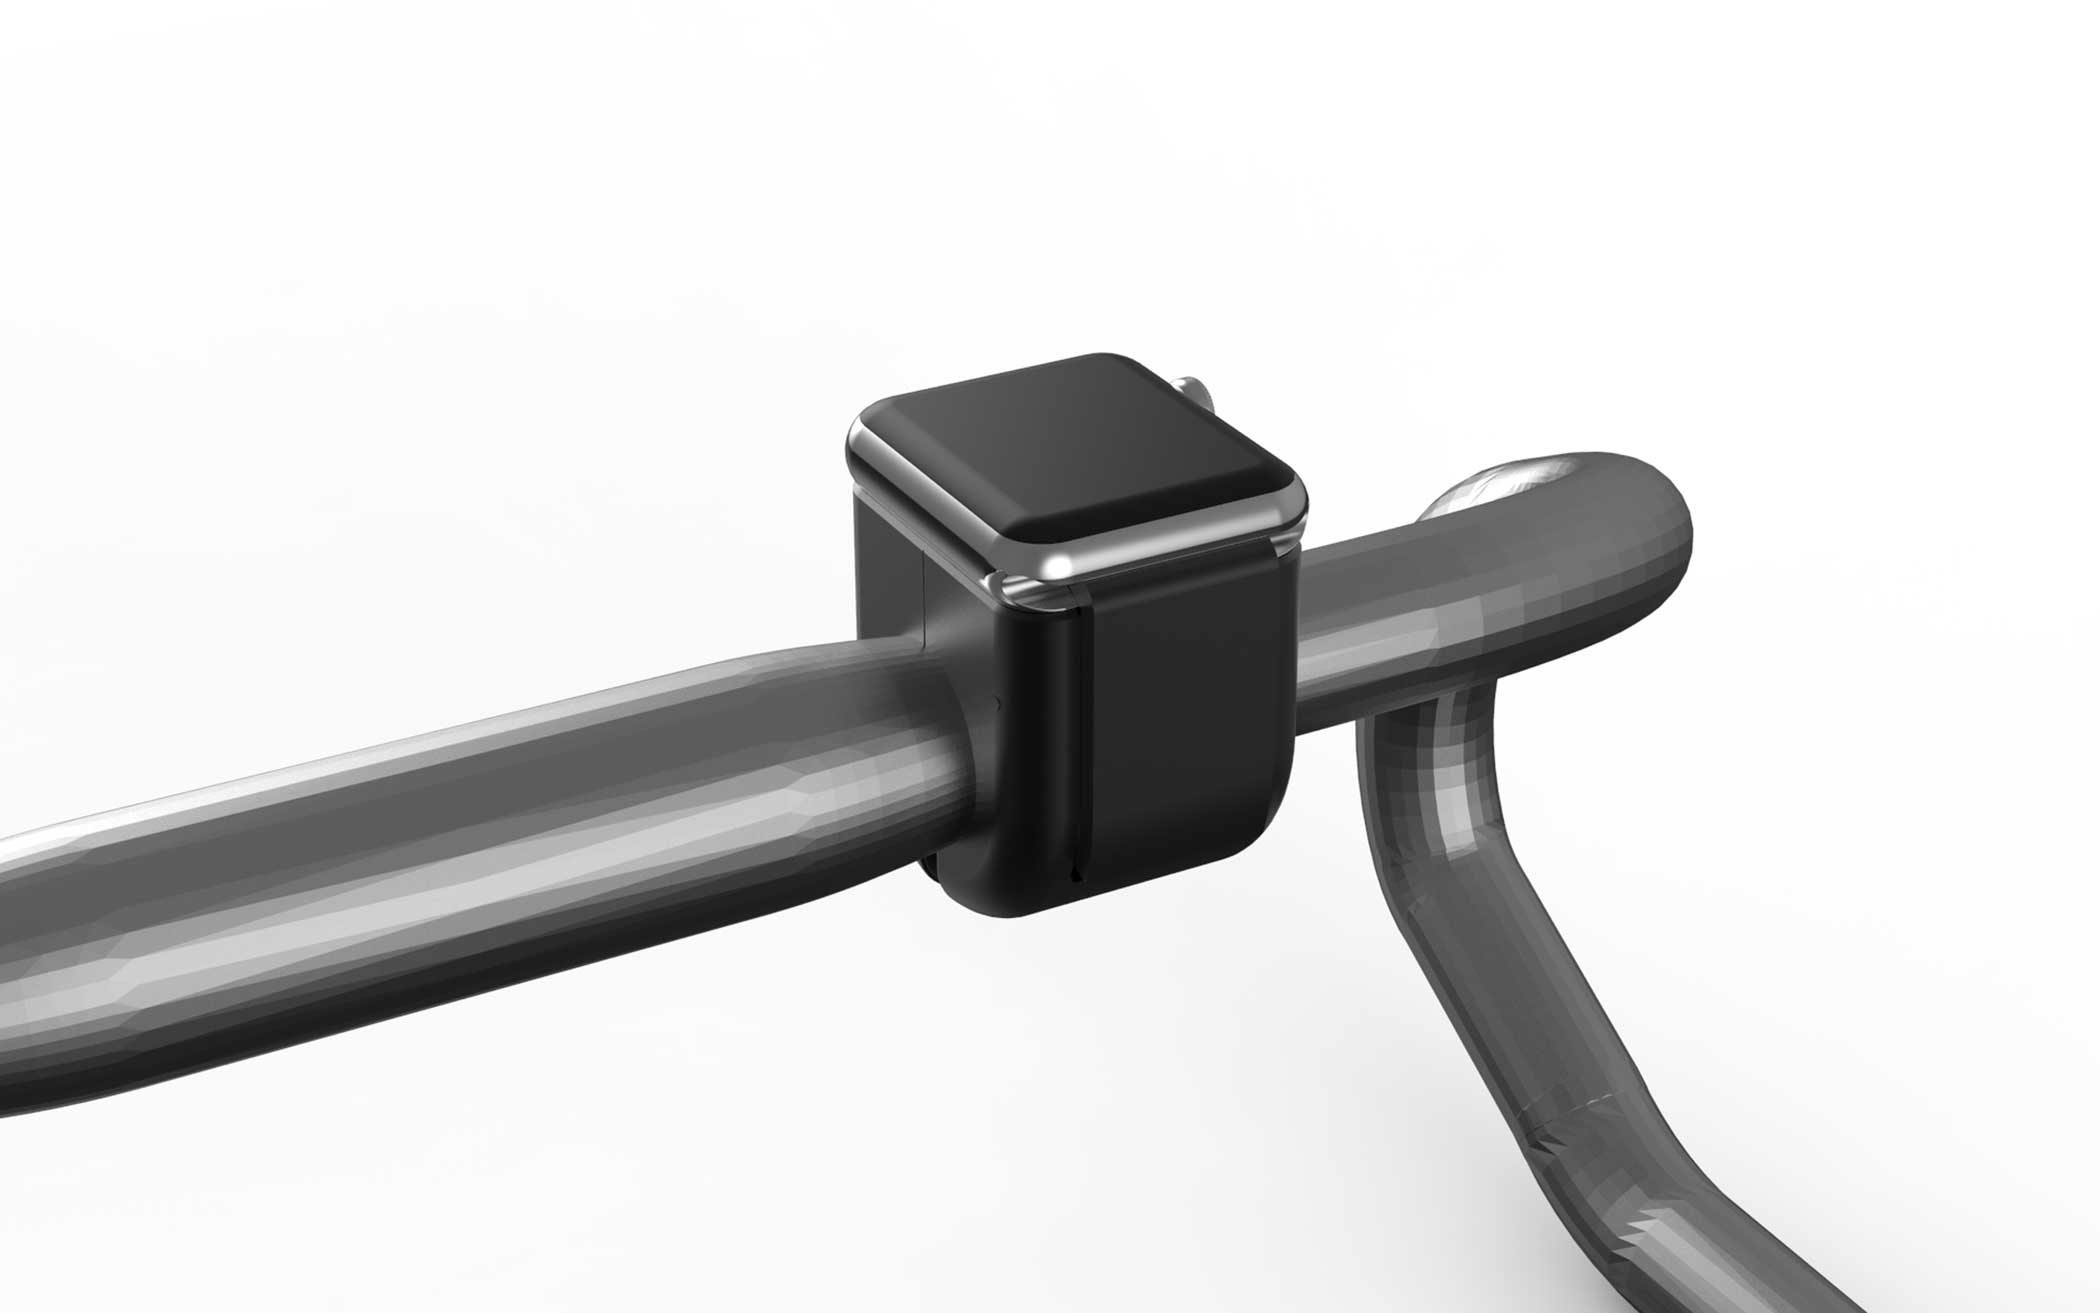 The CyClip The self-described  world's first handlebar adapter for the Apple Watch  allows you to mount your device to your bike, moped or motorcycle to receive hands-free directions, trip computing or other information (at your own risk). Pricing details haven't been announced yet.